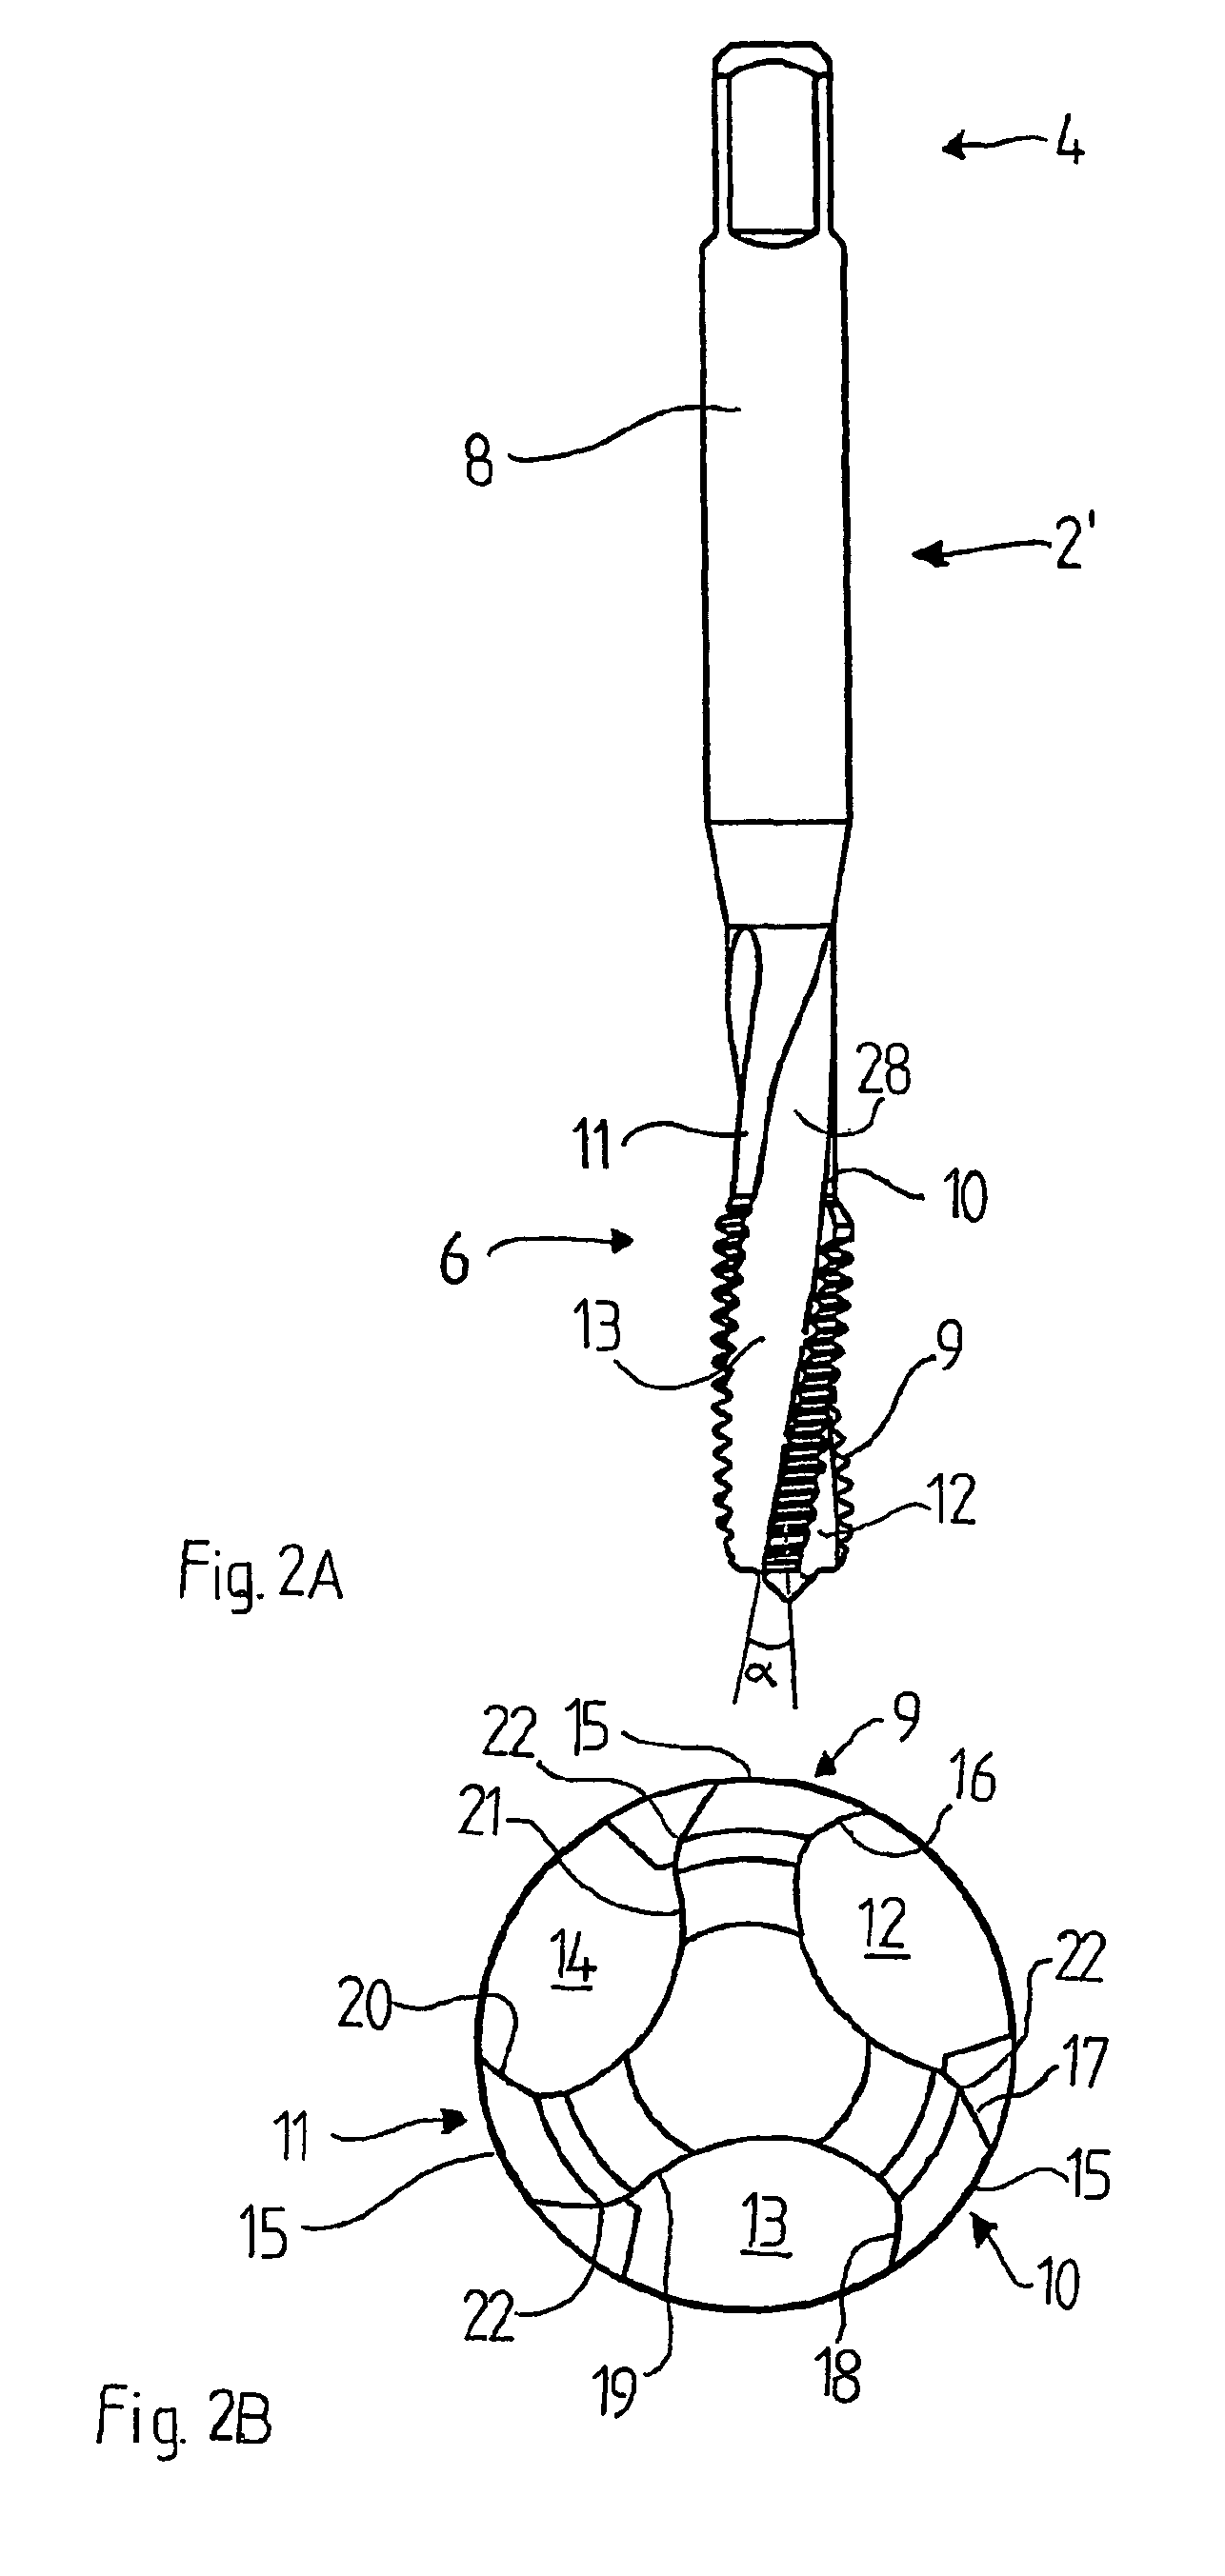 Thread cutting tap and a method of its manufacture